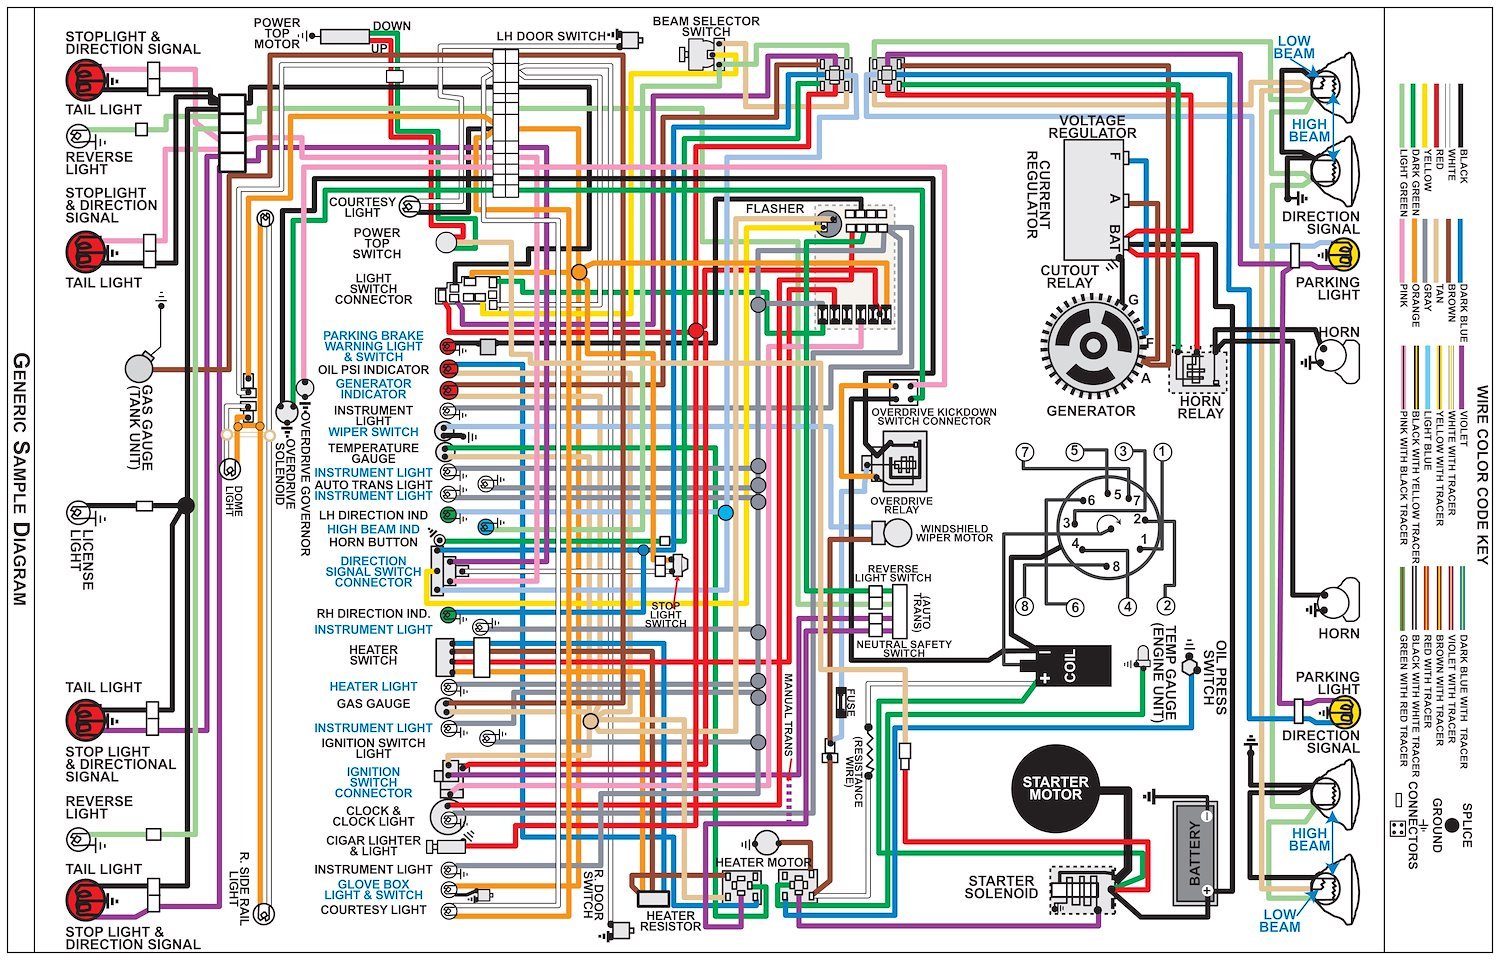 Wiring Diagram for 1962 Chevy Truck, 11 in. x 17 in., Laminated